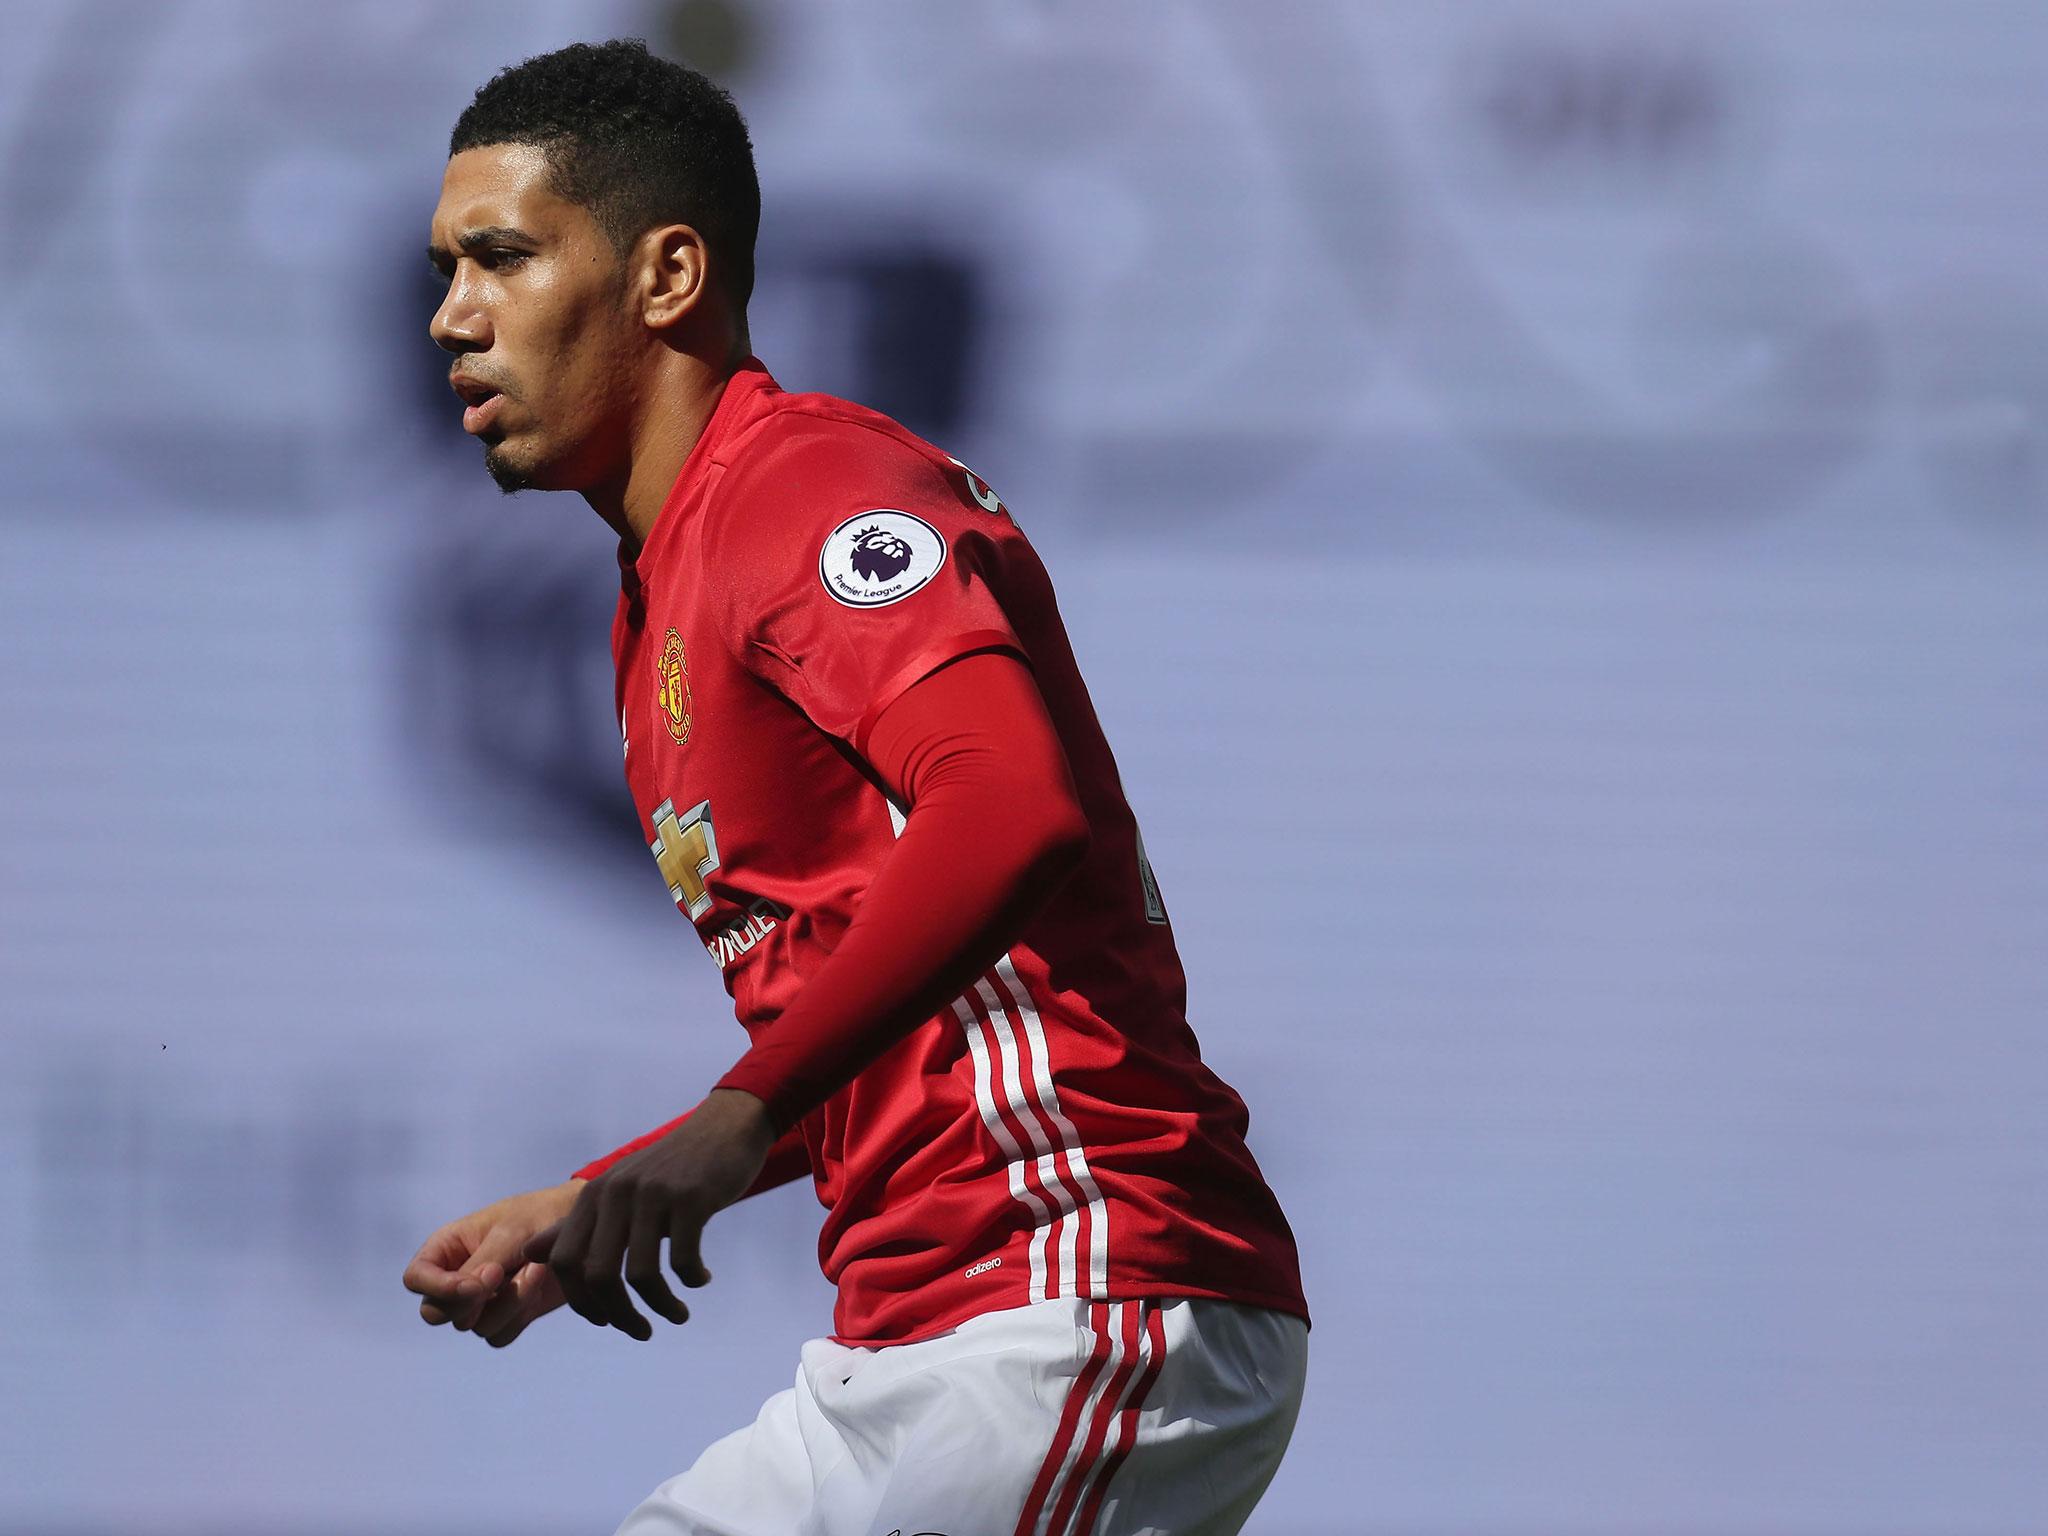 Chris Smalling admitted that his injuries were the story of his season this year